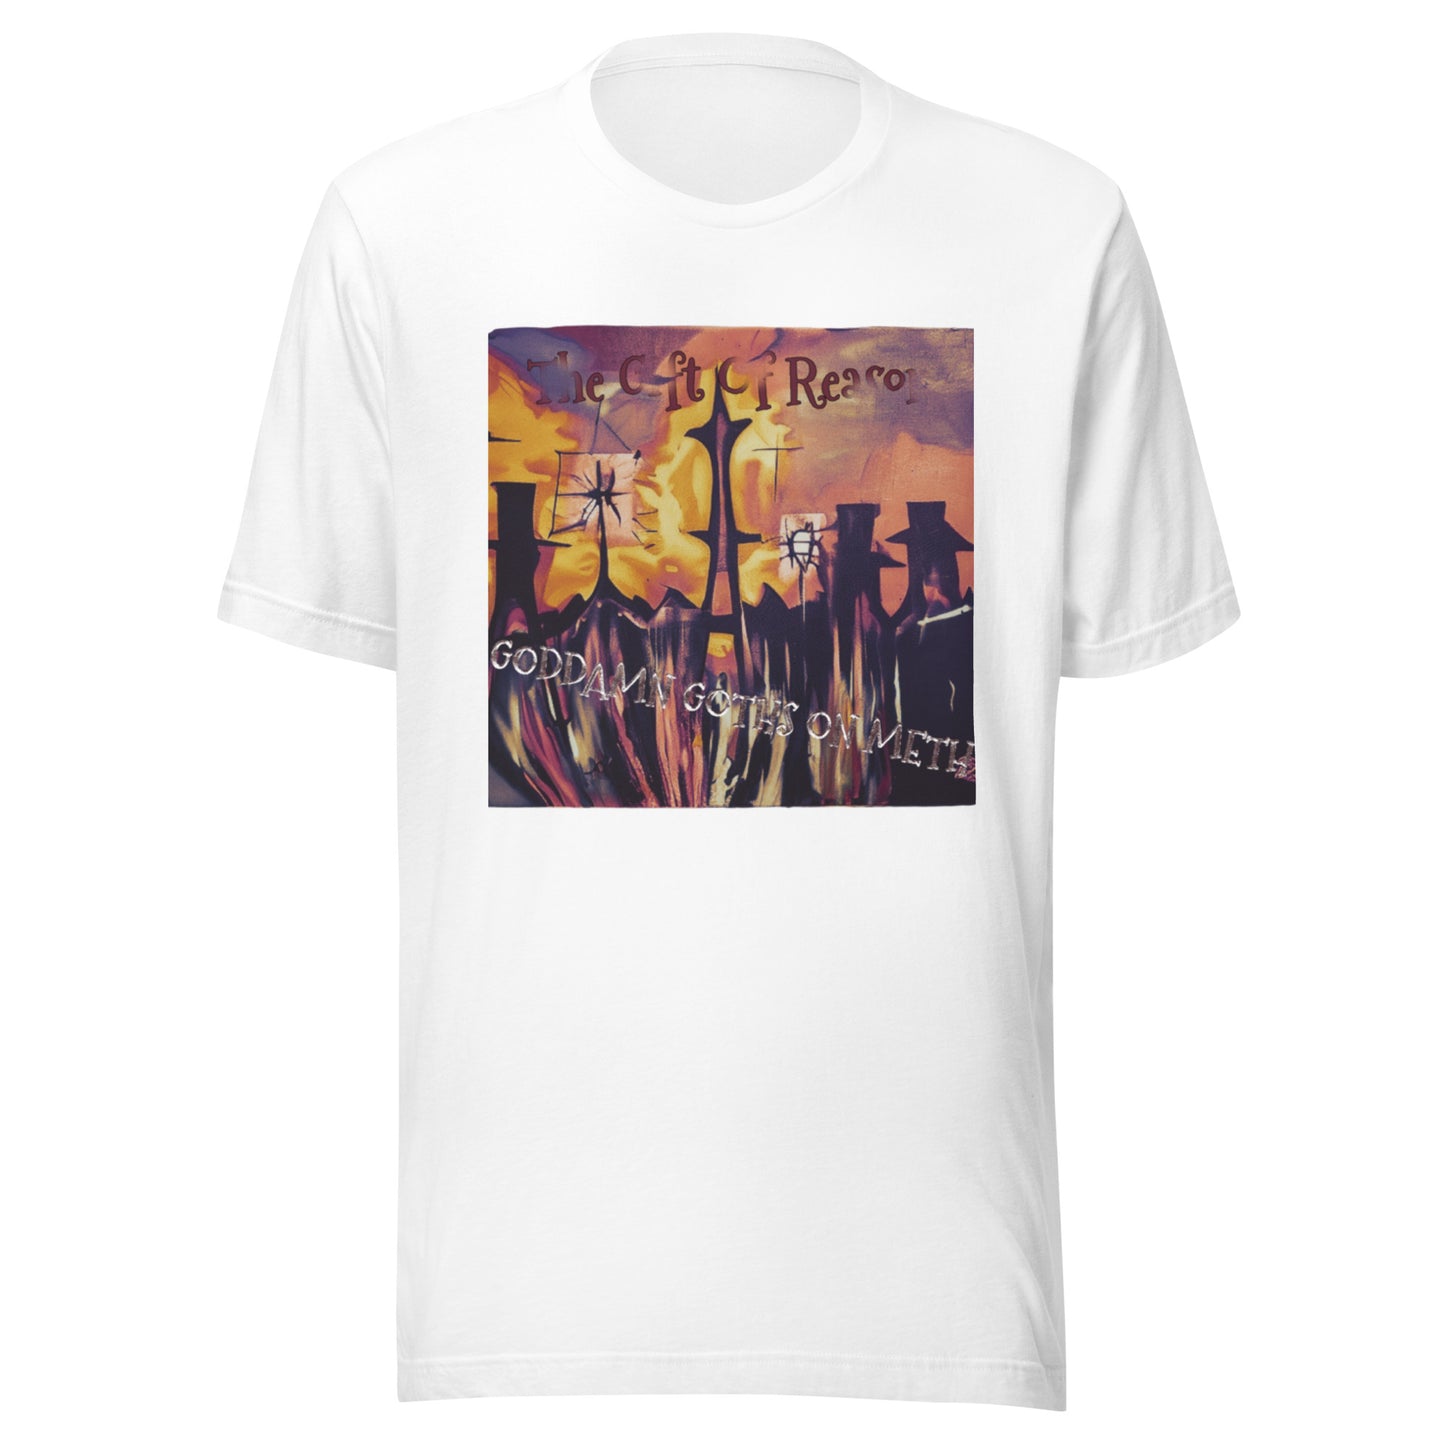 Gift Of Reason (THE STRIP) Unisex t-shirt